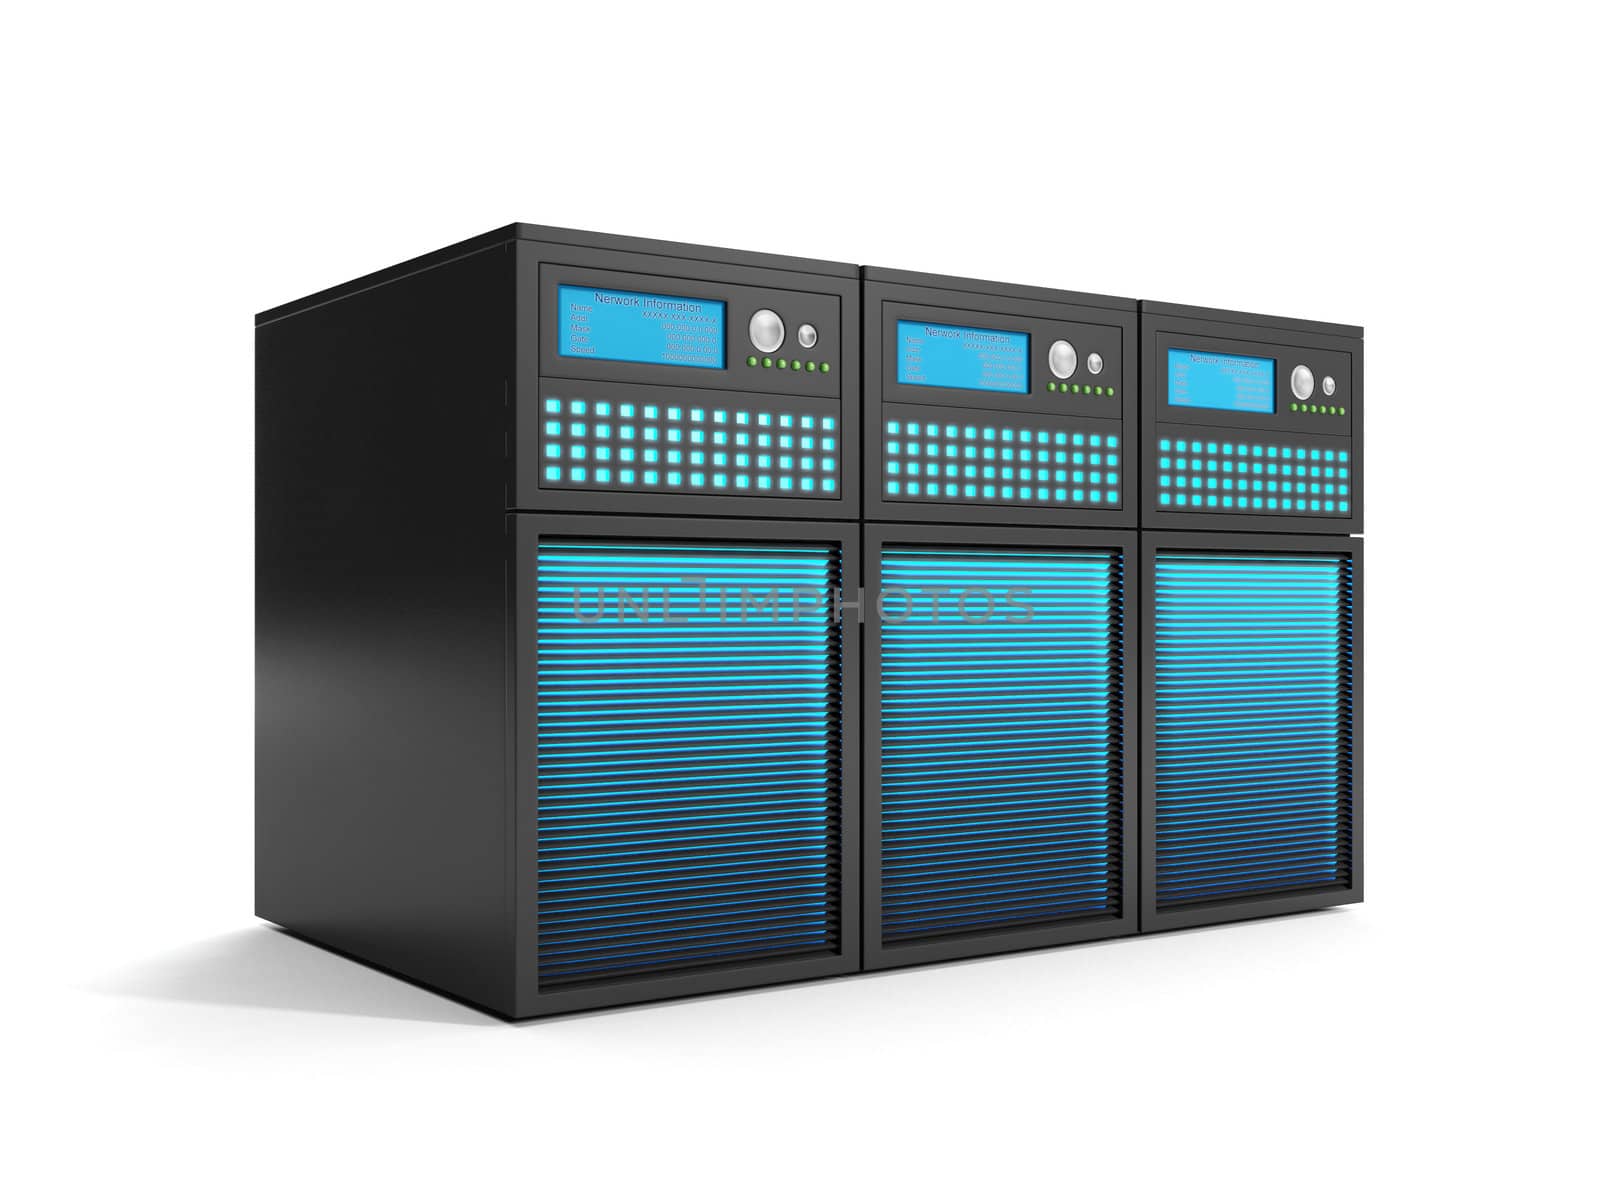 3d illustration: Data Storage, a group of servers in close-up